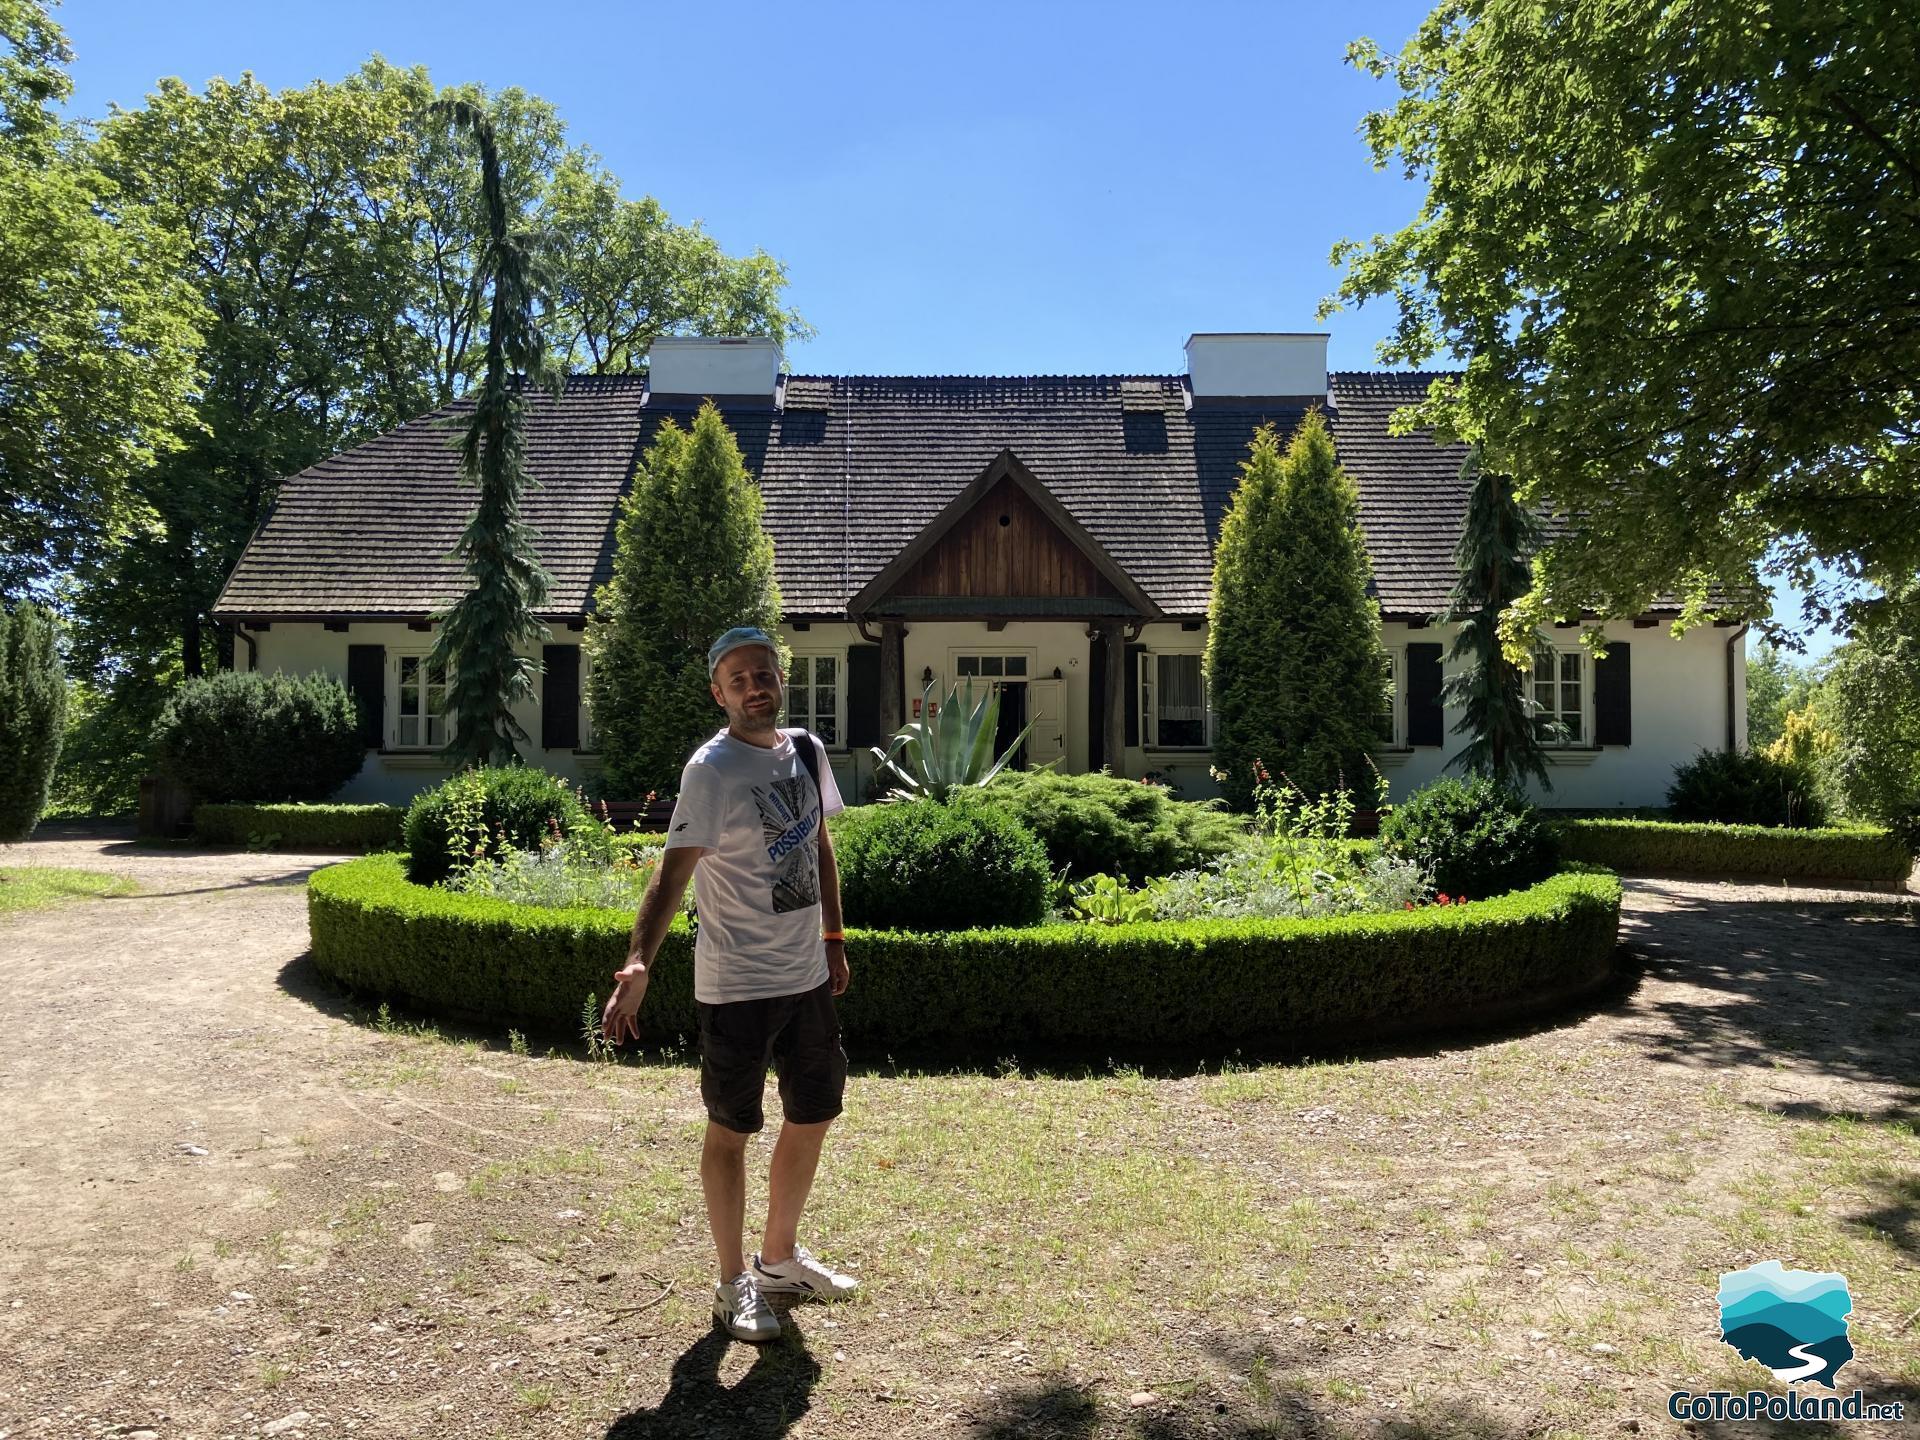 the man is standing in front of the manor house, there is a garden in the shape of a circle between the man and the manor house, and a circular path around the garden